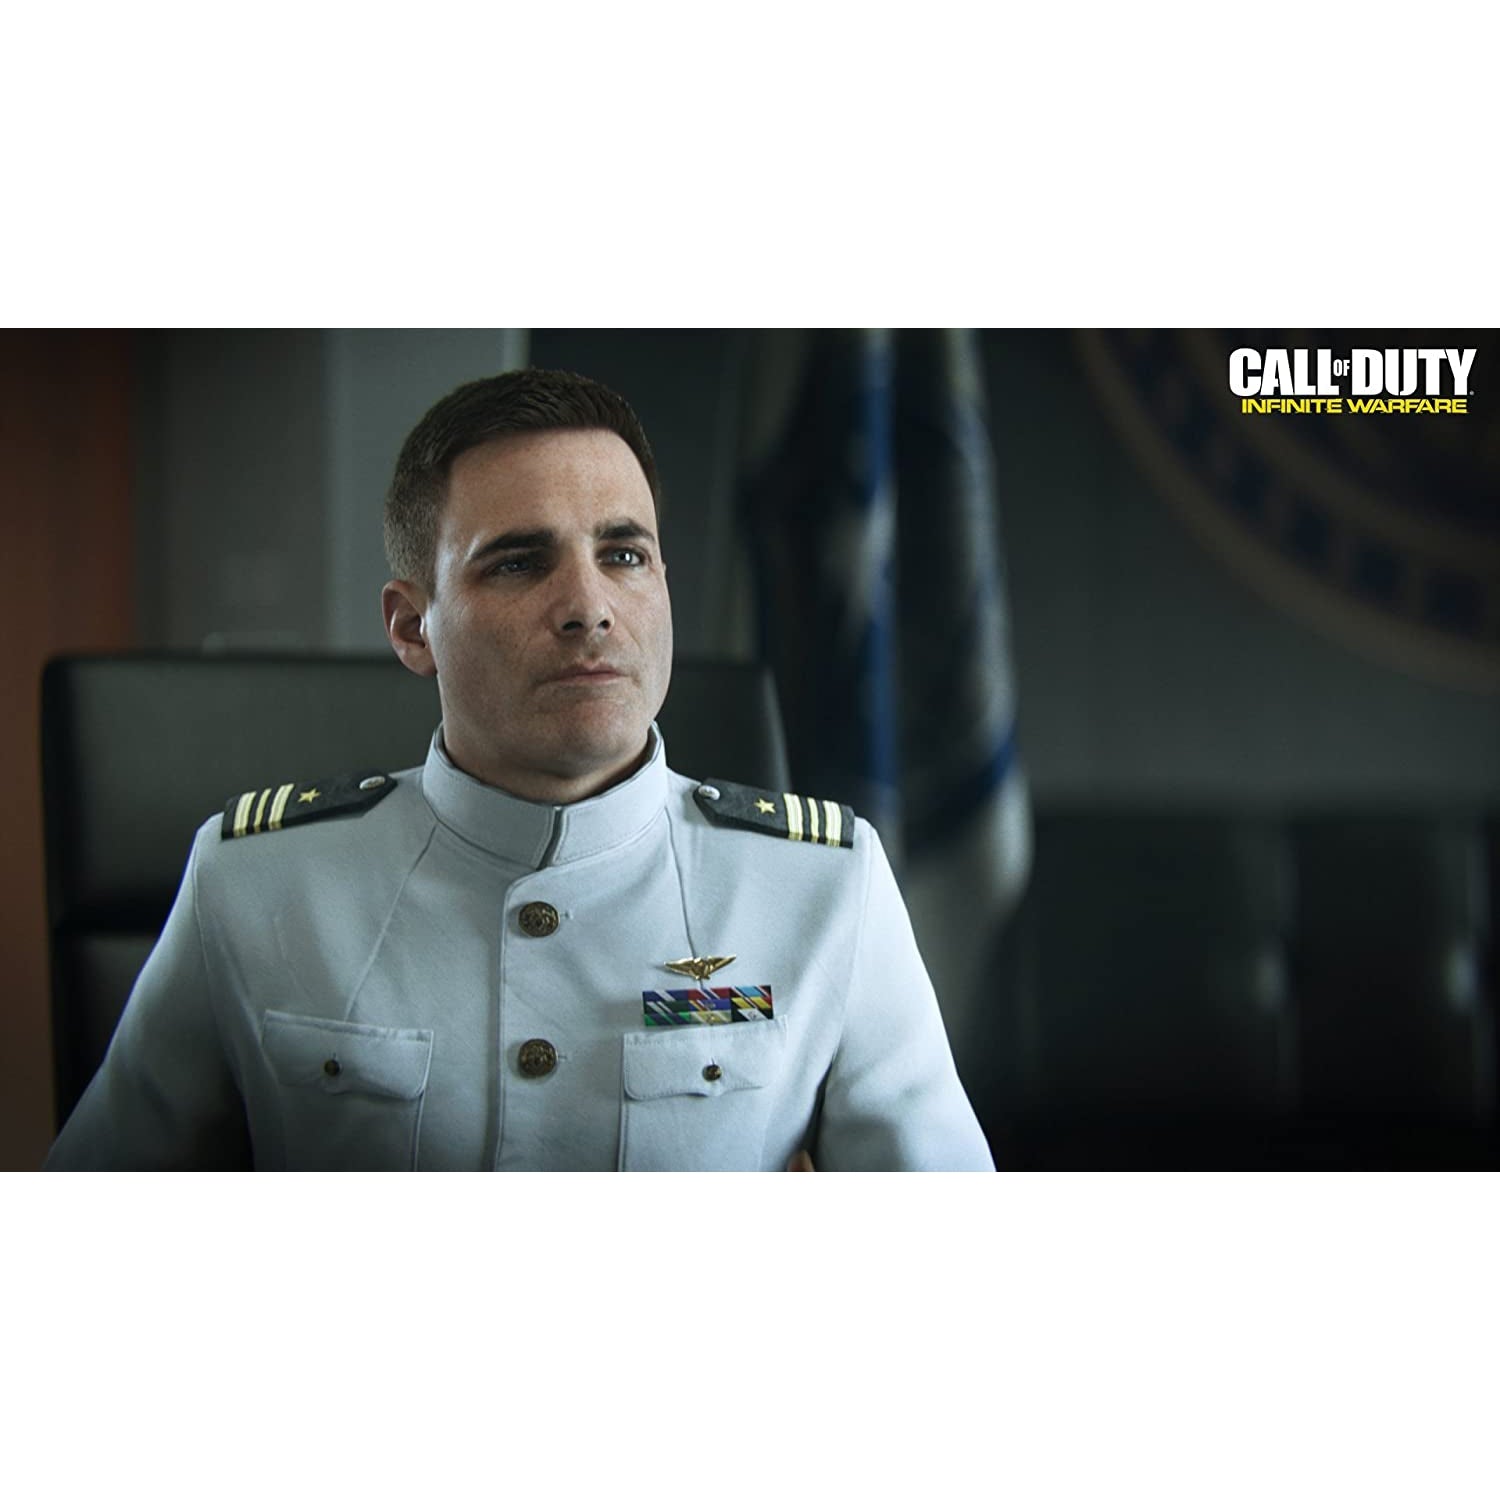 Call Of Duty: Infinite Warfare (PS4) - Refurbished Excellent